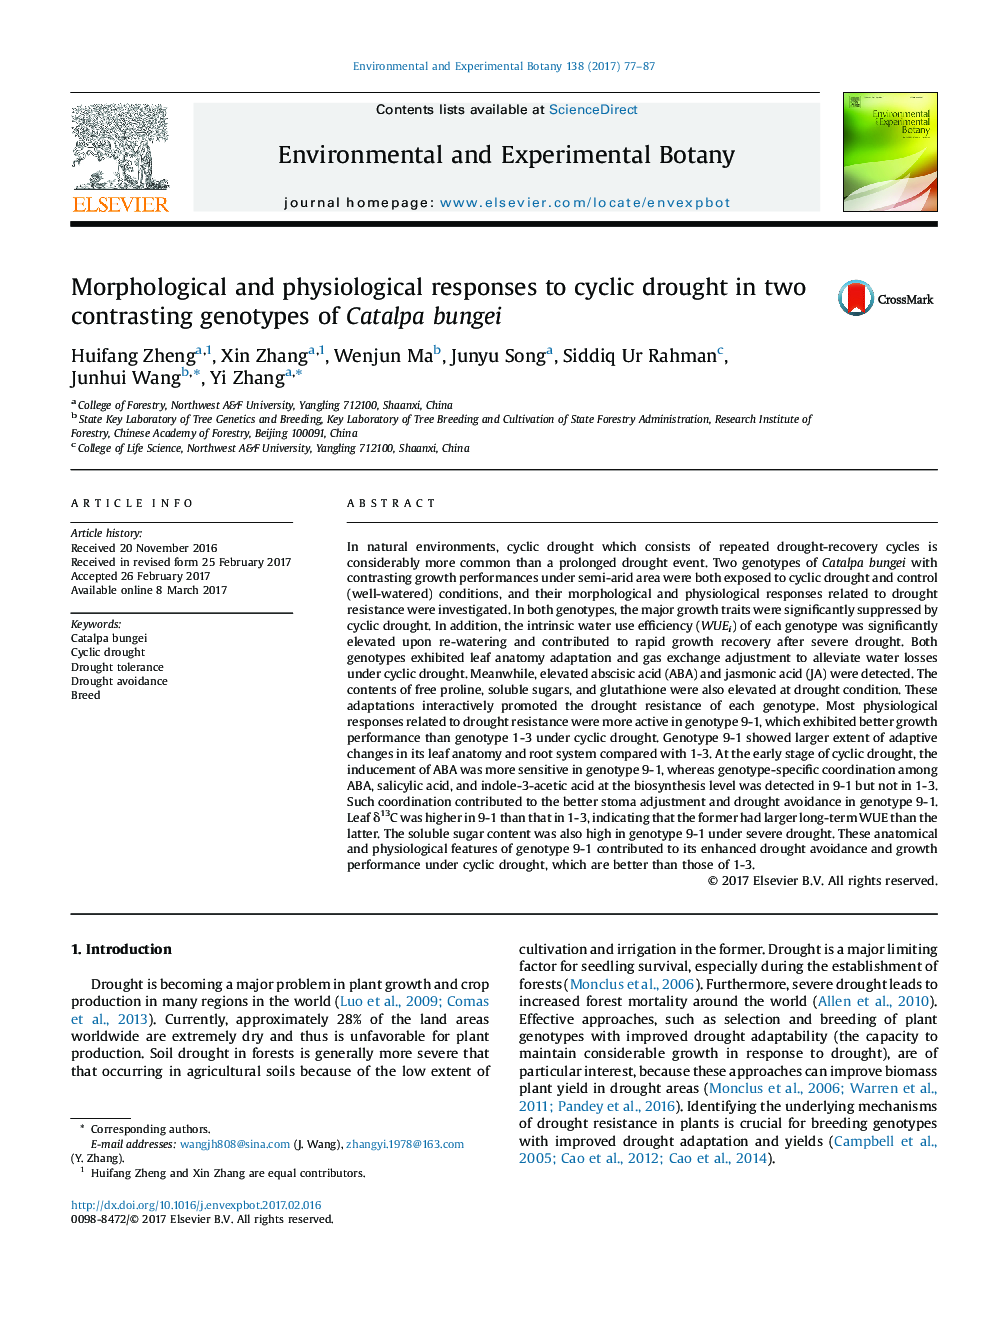 Morphological and physiological responses to cyclic drought in two contrasting genotypes of Catalpa bungei